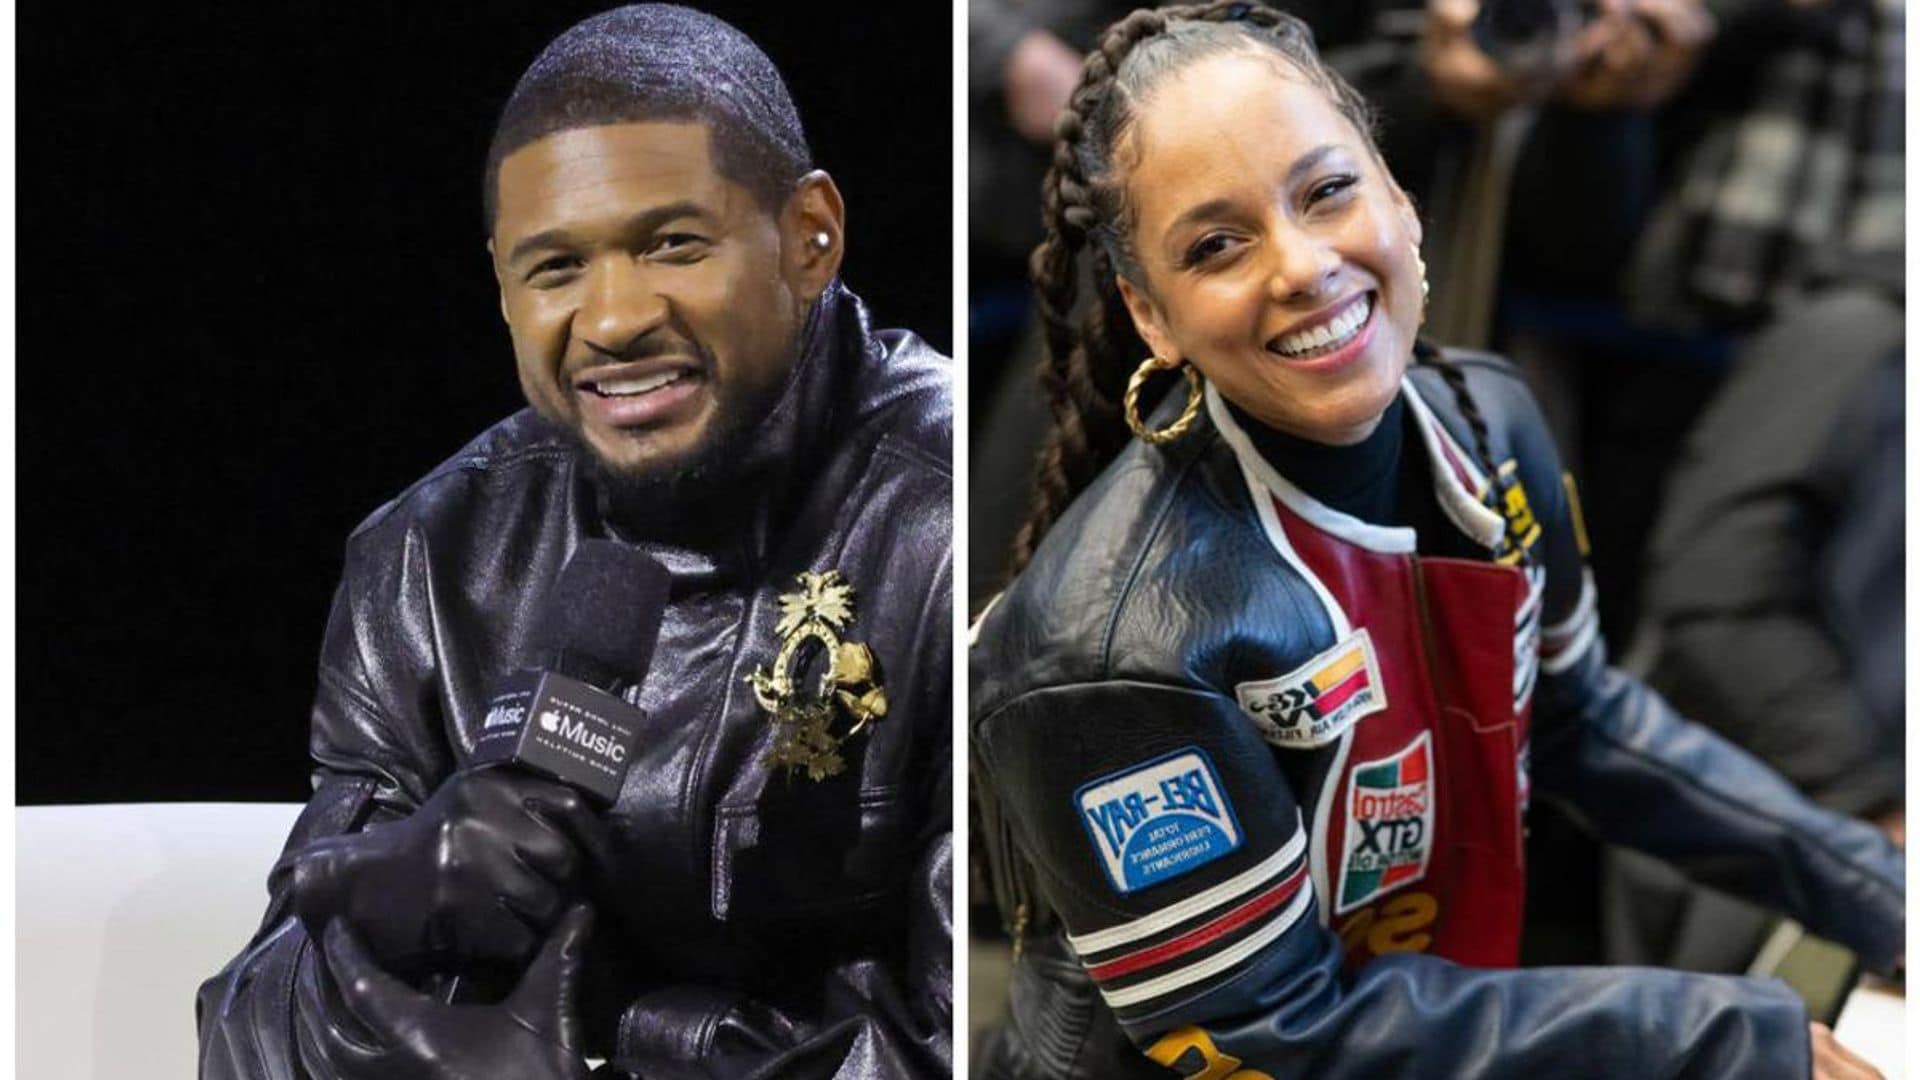 Super Bowl: Alicia Keys to join Usher as a special guest at the Halftime Show